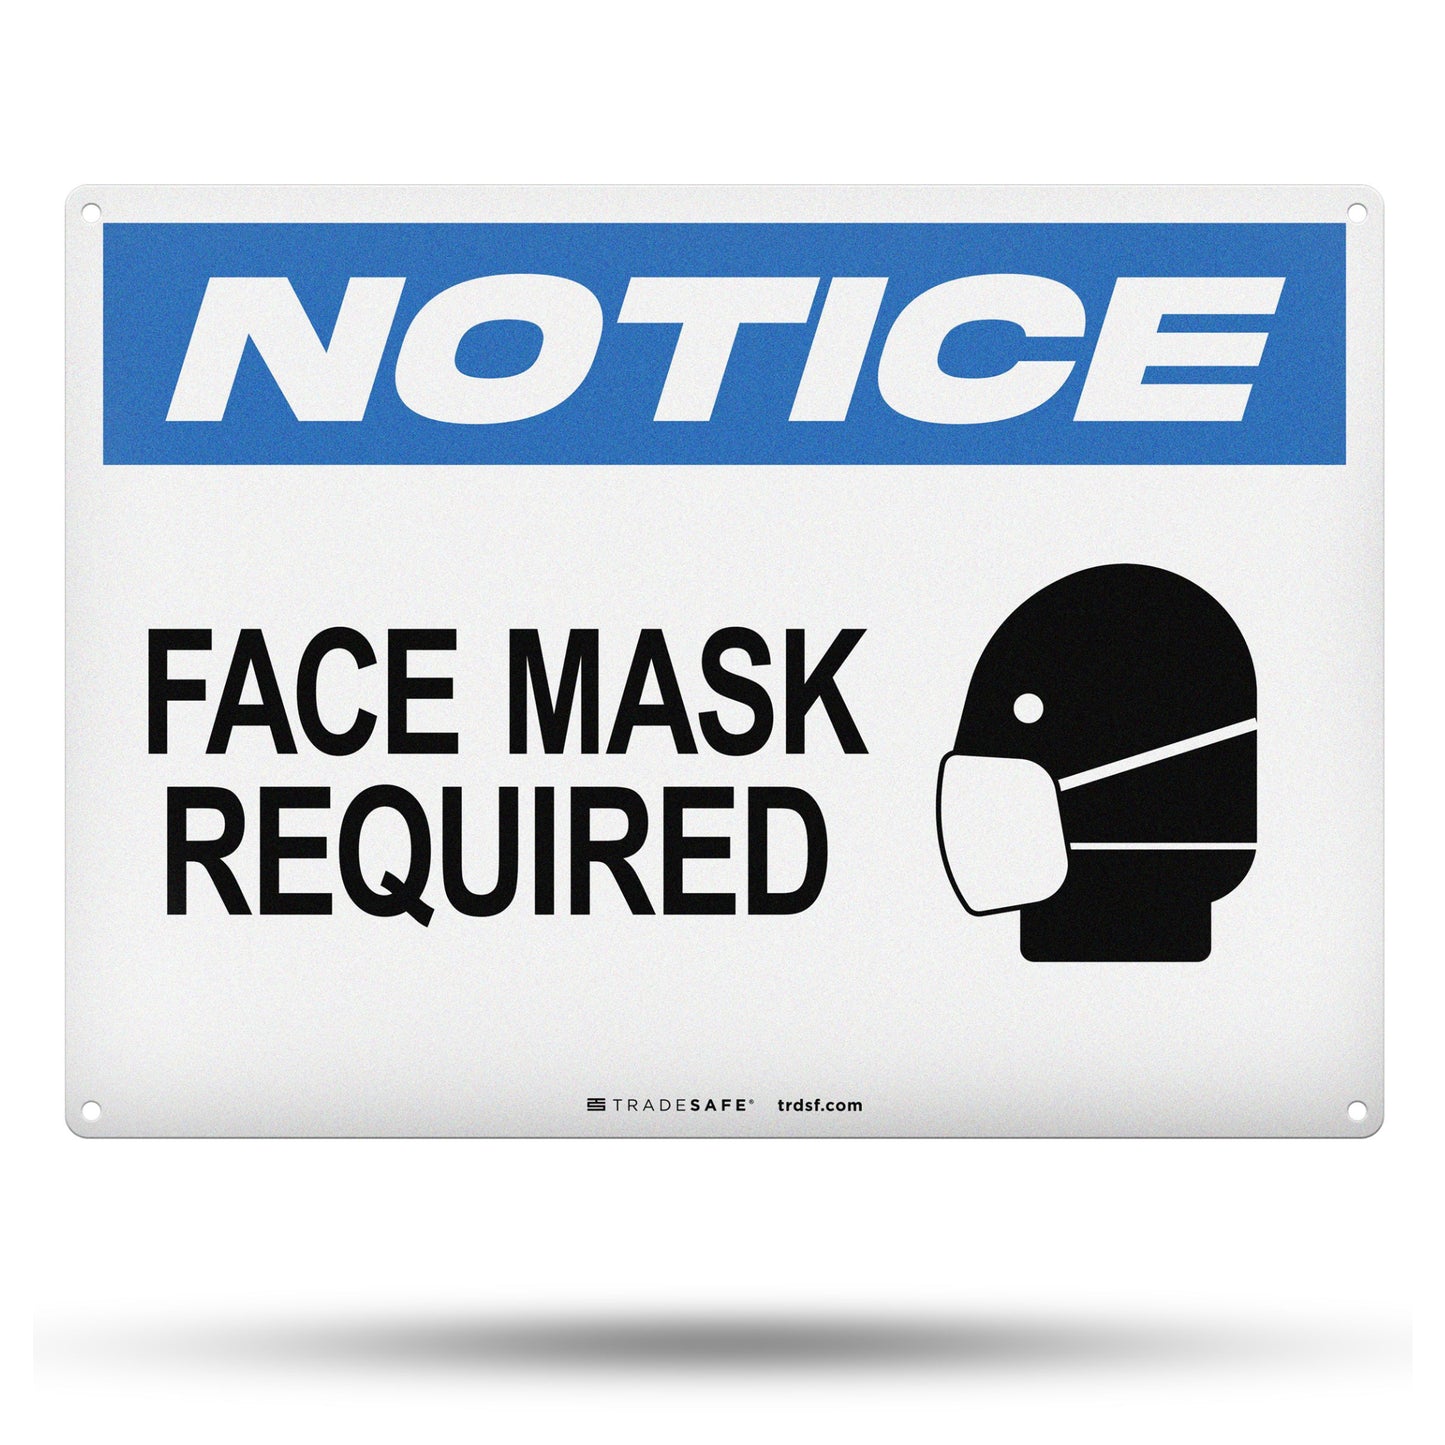 notice face mask required sign for COVID-19